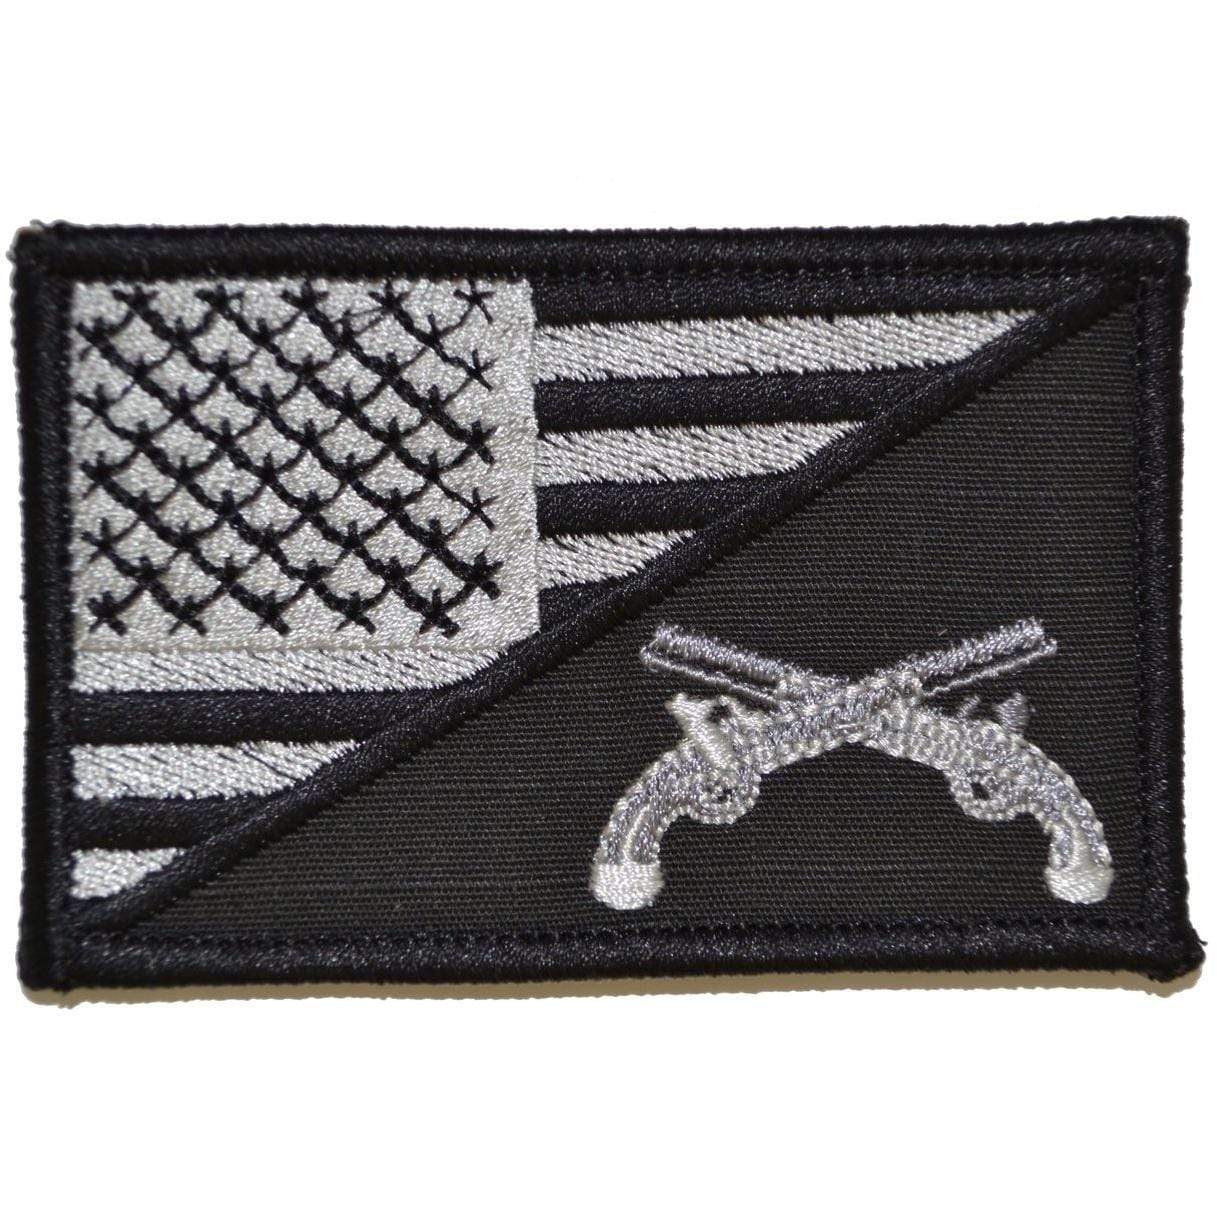 Tactical Gear Junkie Patches Black MP Military Police USA Flag - 2.25x3.5 Patch